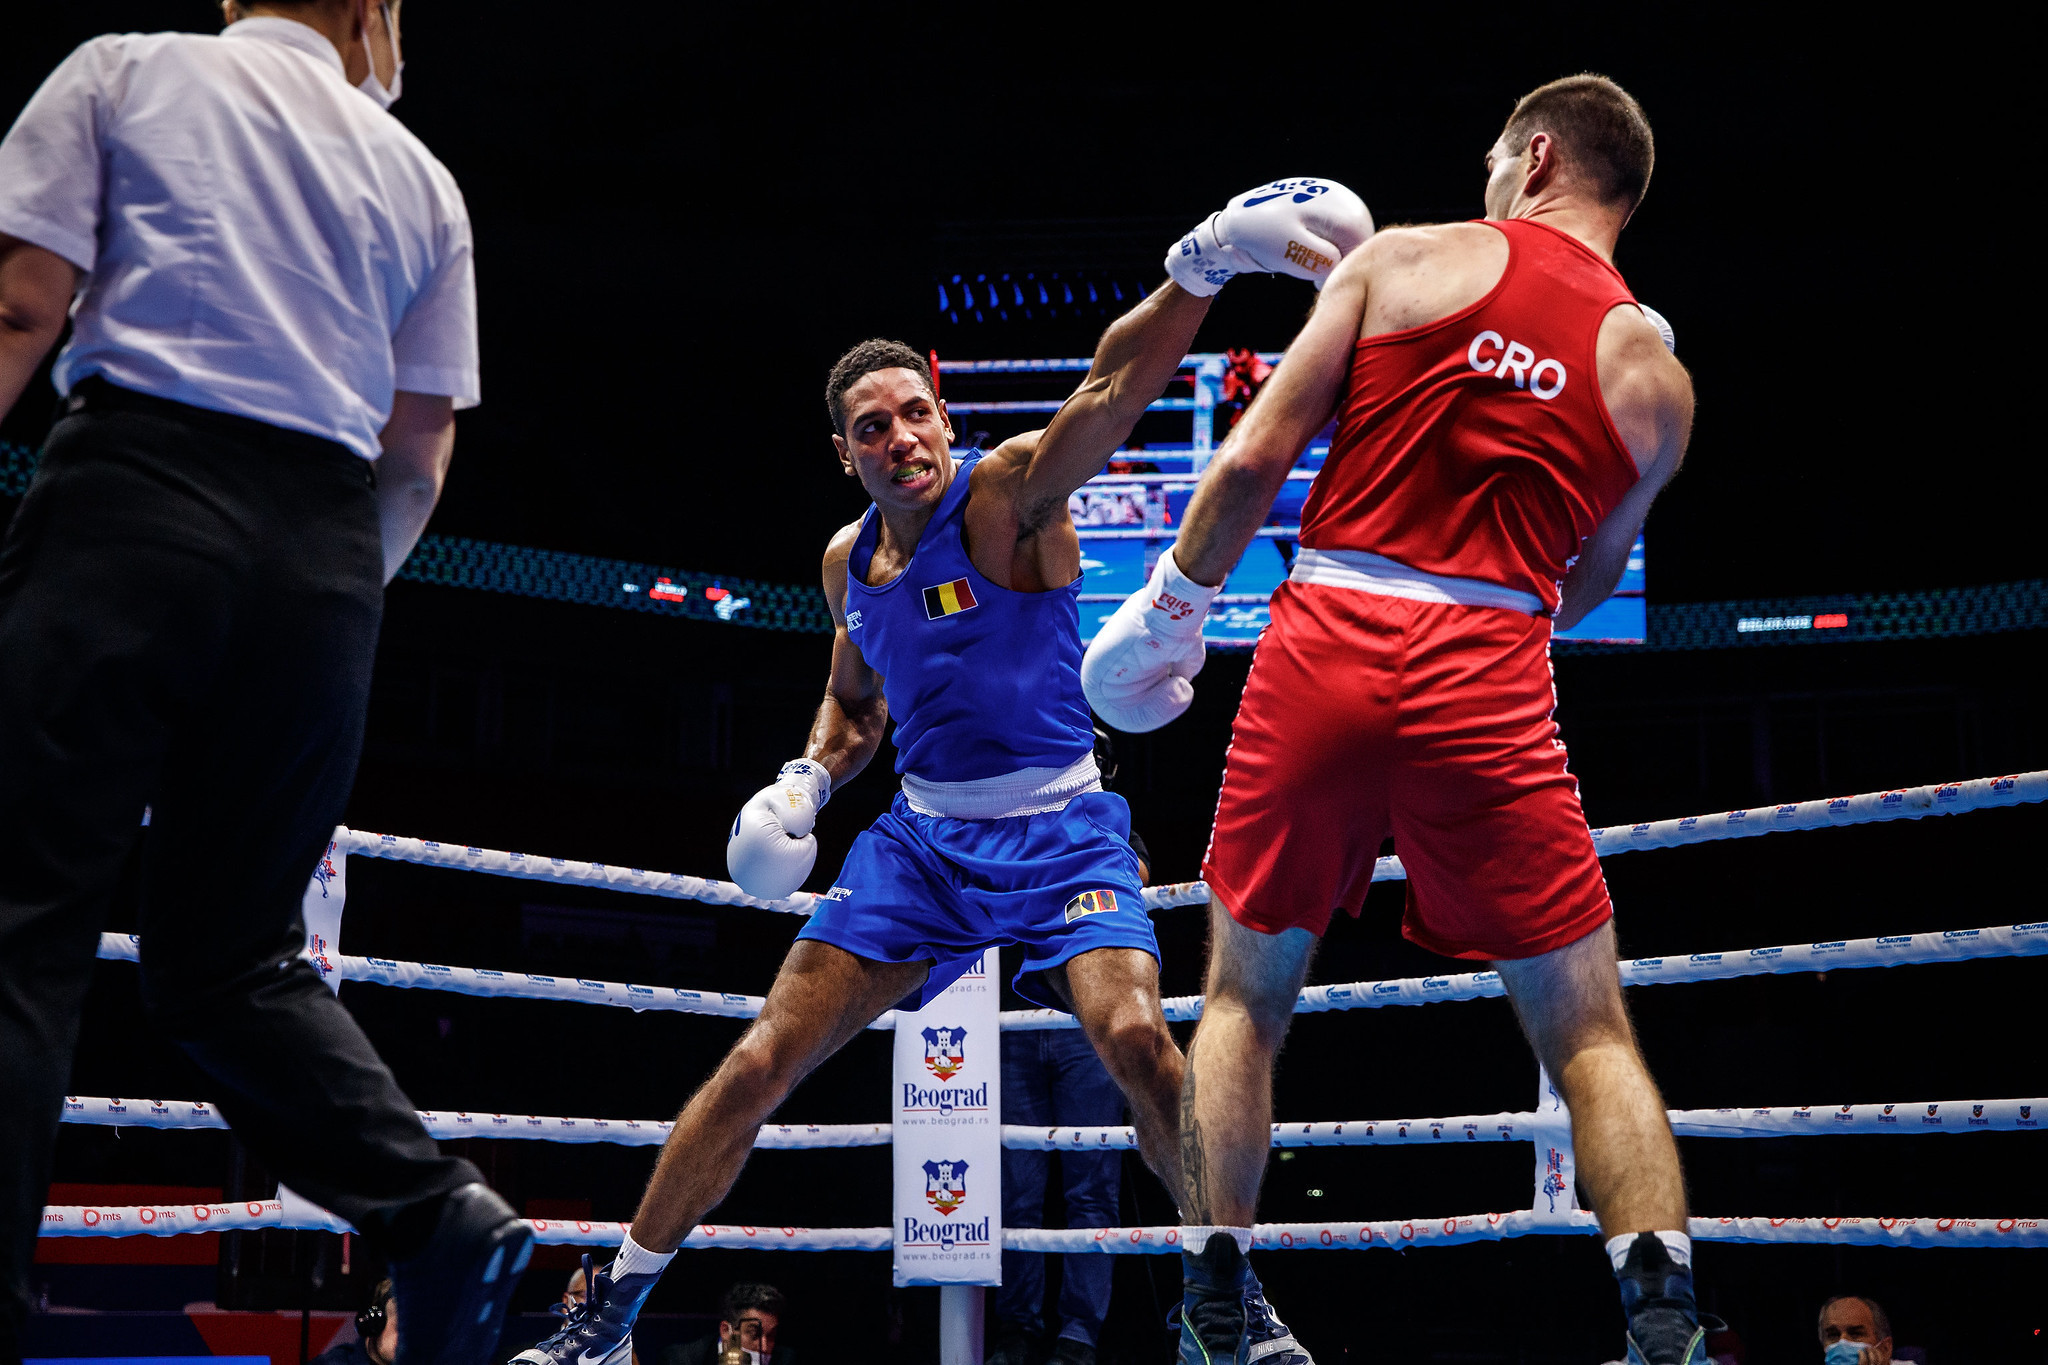 No knockout this time for Belgian Victor Schelstraete, but he was a dominant winner against Damir Plantic ©AIBA